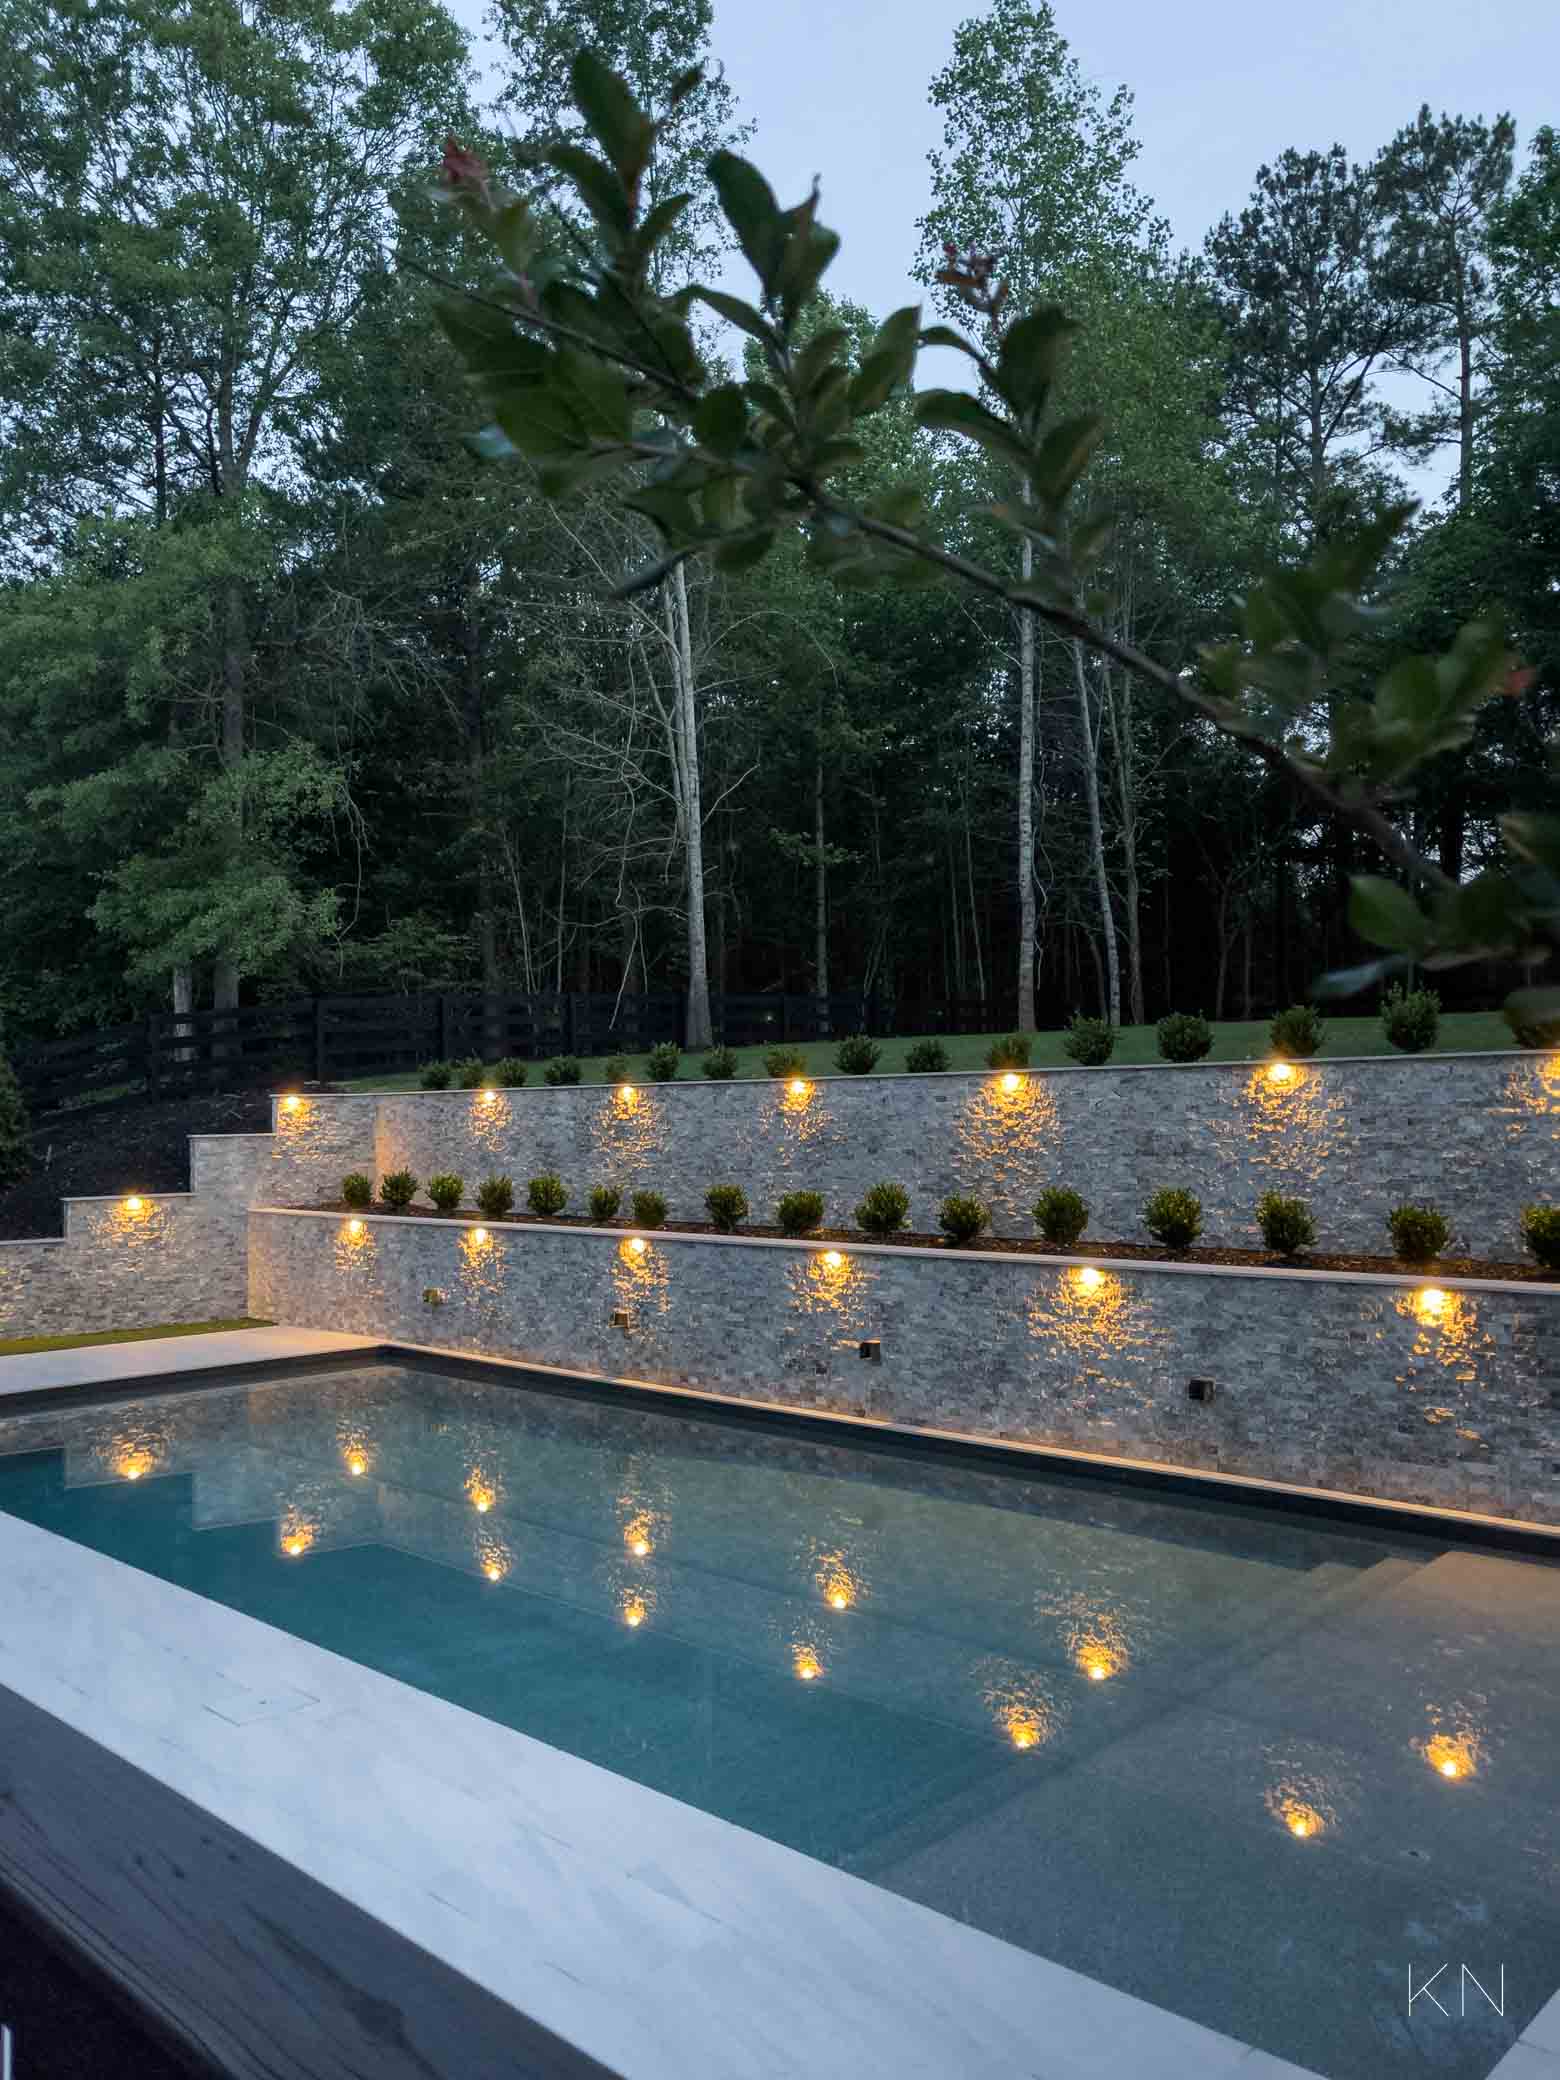 Double Retaining Wall Design with Landscape Lighting and Boxwoods